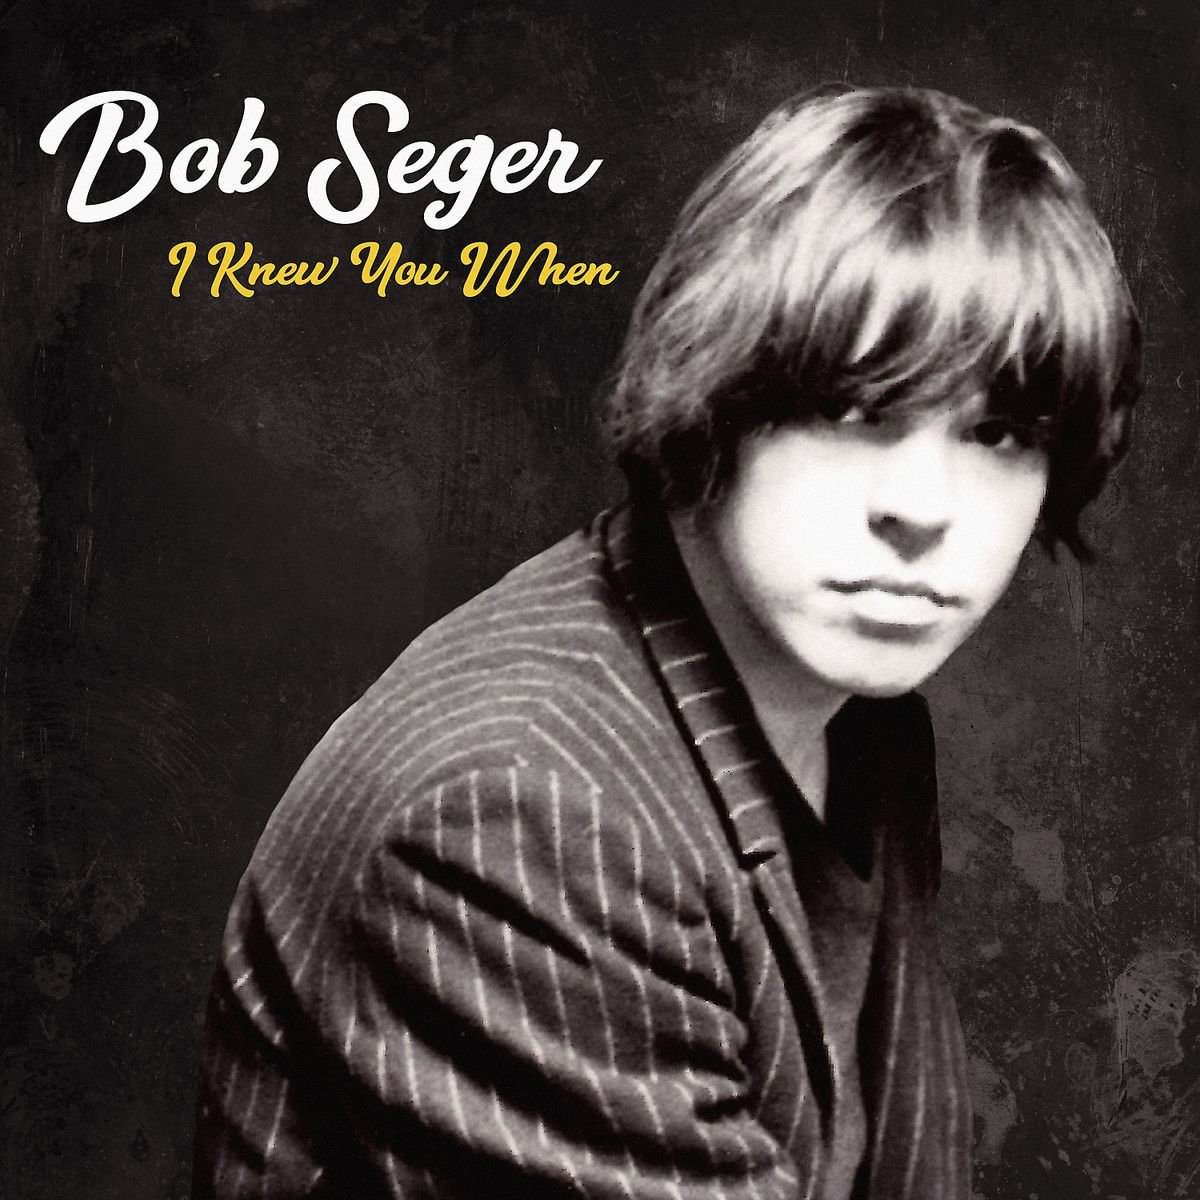 Bob Seger – I Knew You When {Deluxe Edition} (2017) [HDTracks FLAC 24bit/96kHz]